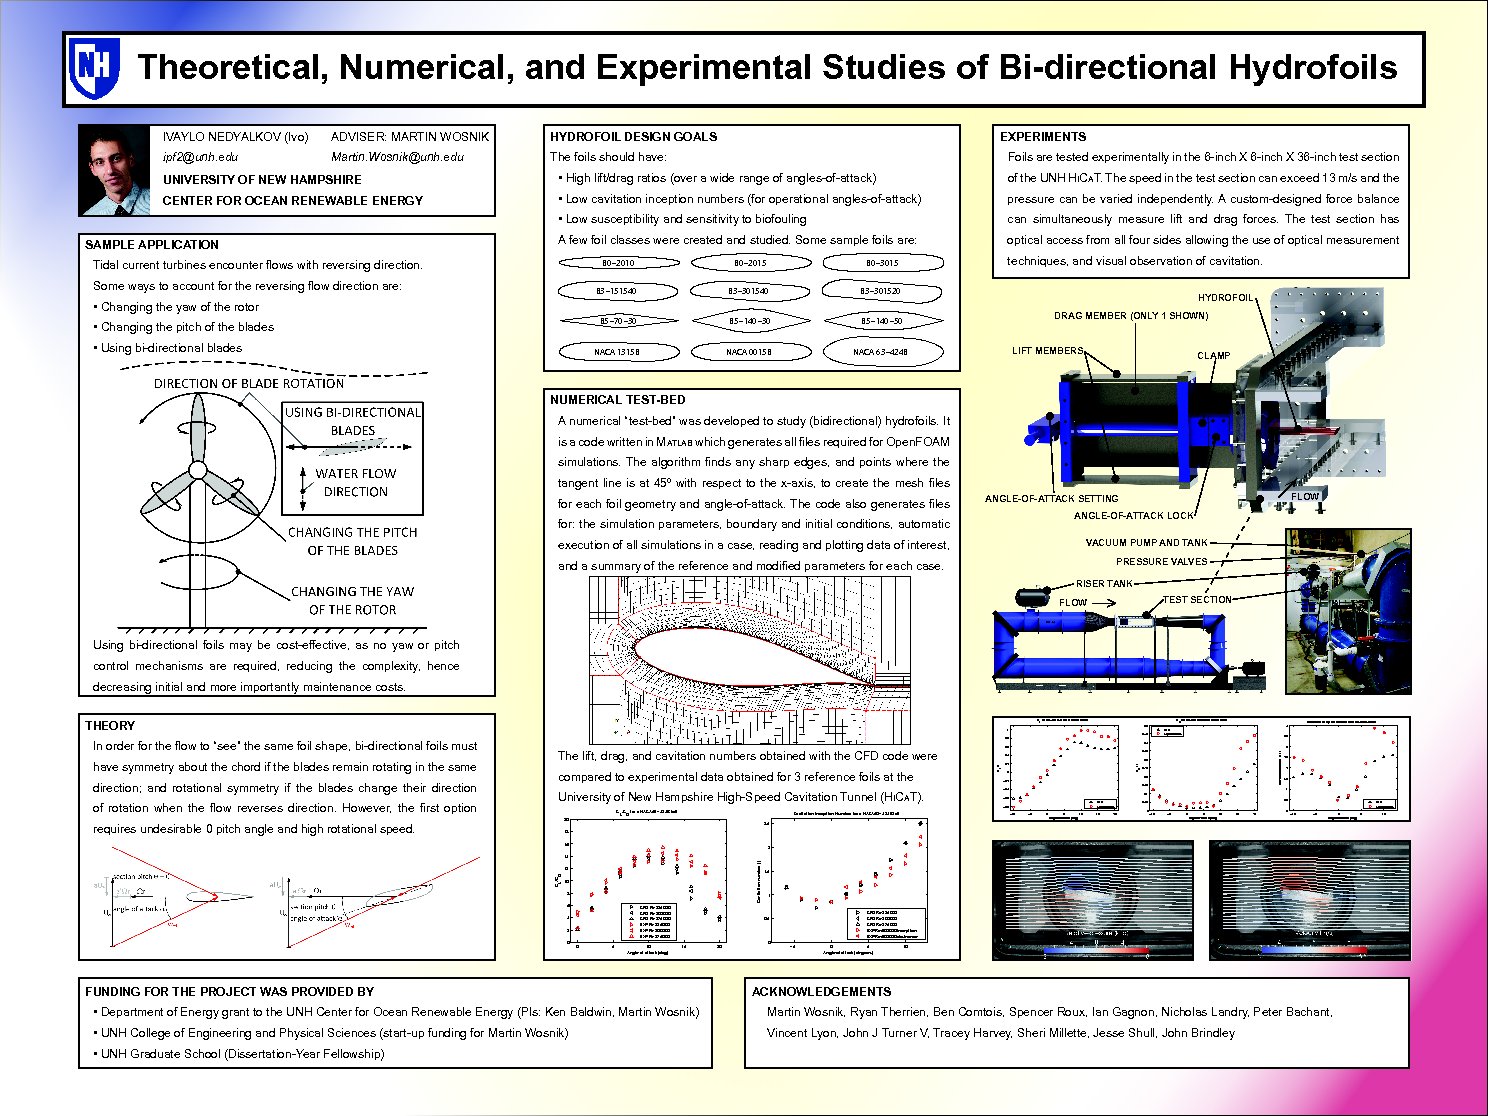 Theoretical, Numerical, And Experimental Studies Of Bi-Directional Hydrofoils by ivaylo